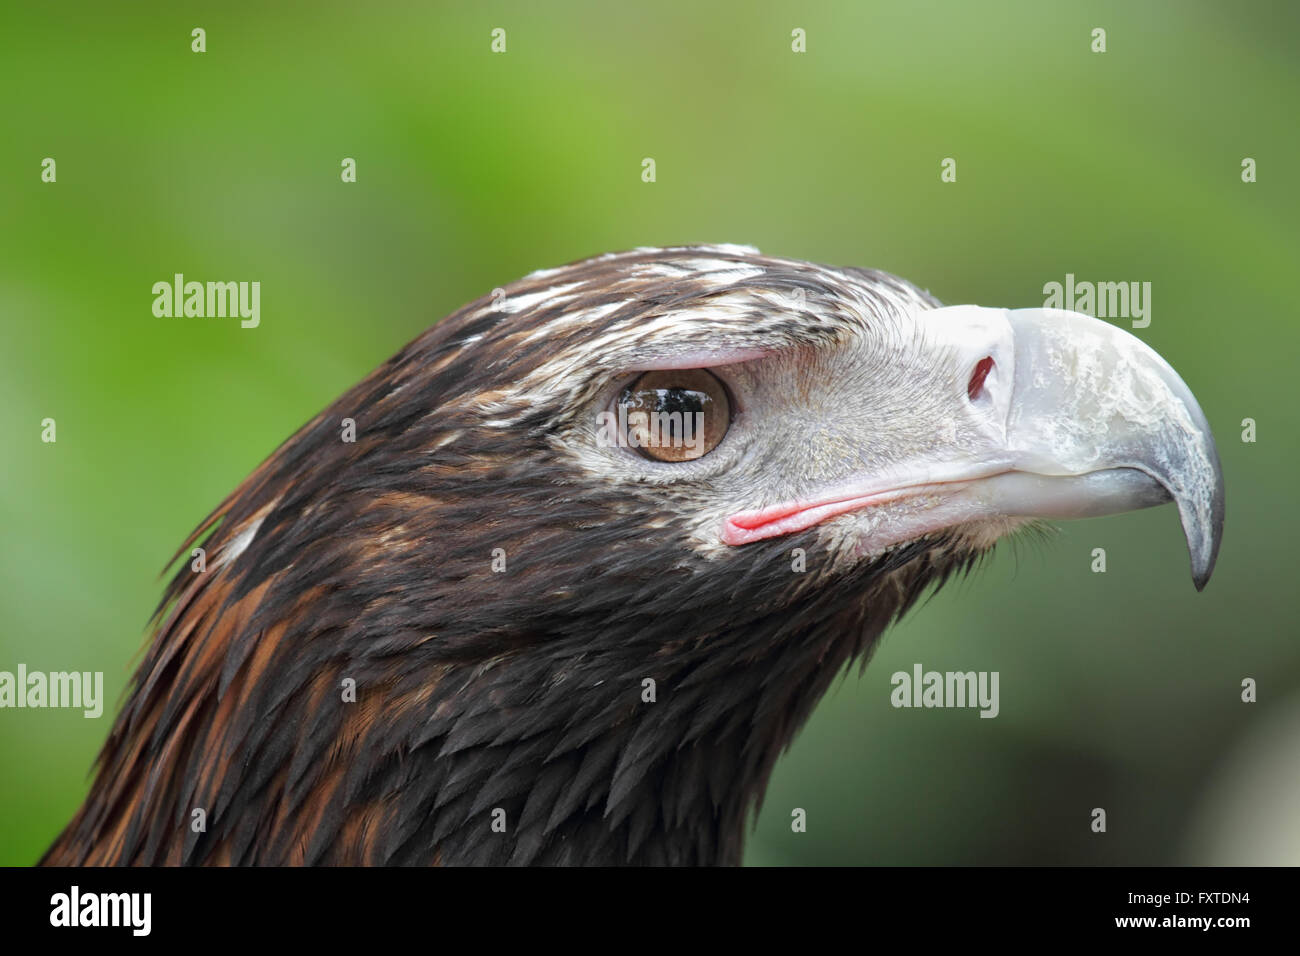 Close up of a Wedge-tailed Eagle (Aquila audax) in Queensland, Australia. Stock Photo